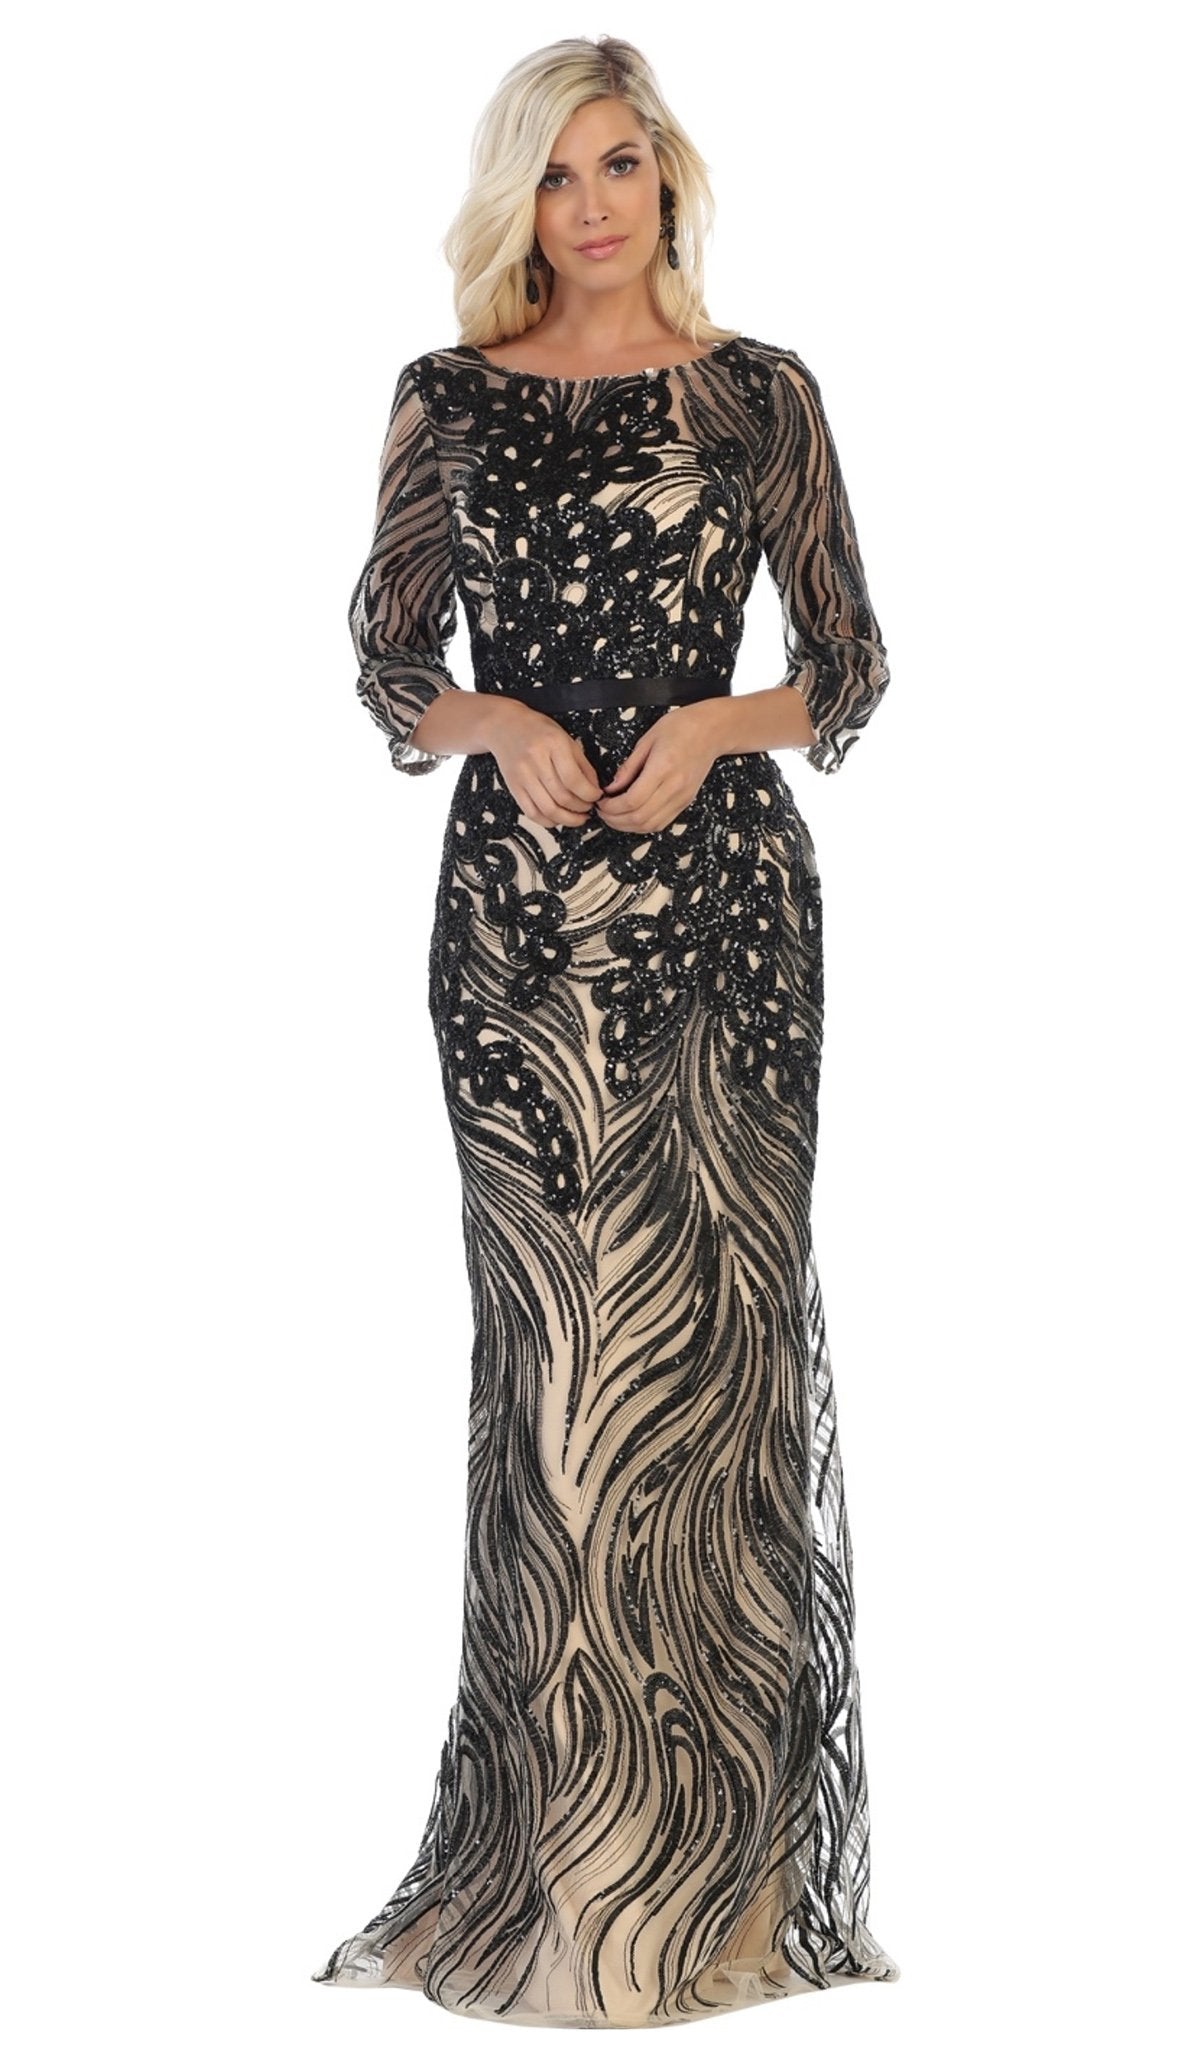 May Queen - Embellished Bateau Sheath Evening Dress RQ7686 In Black and Neutral